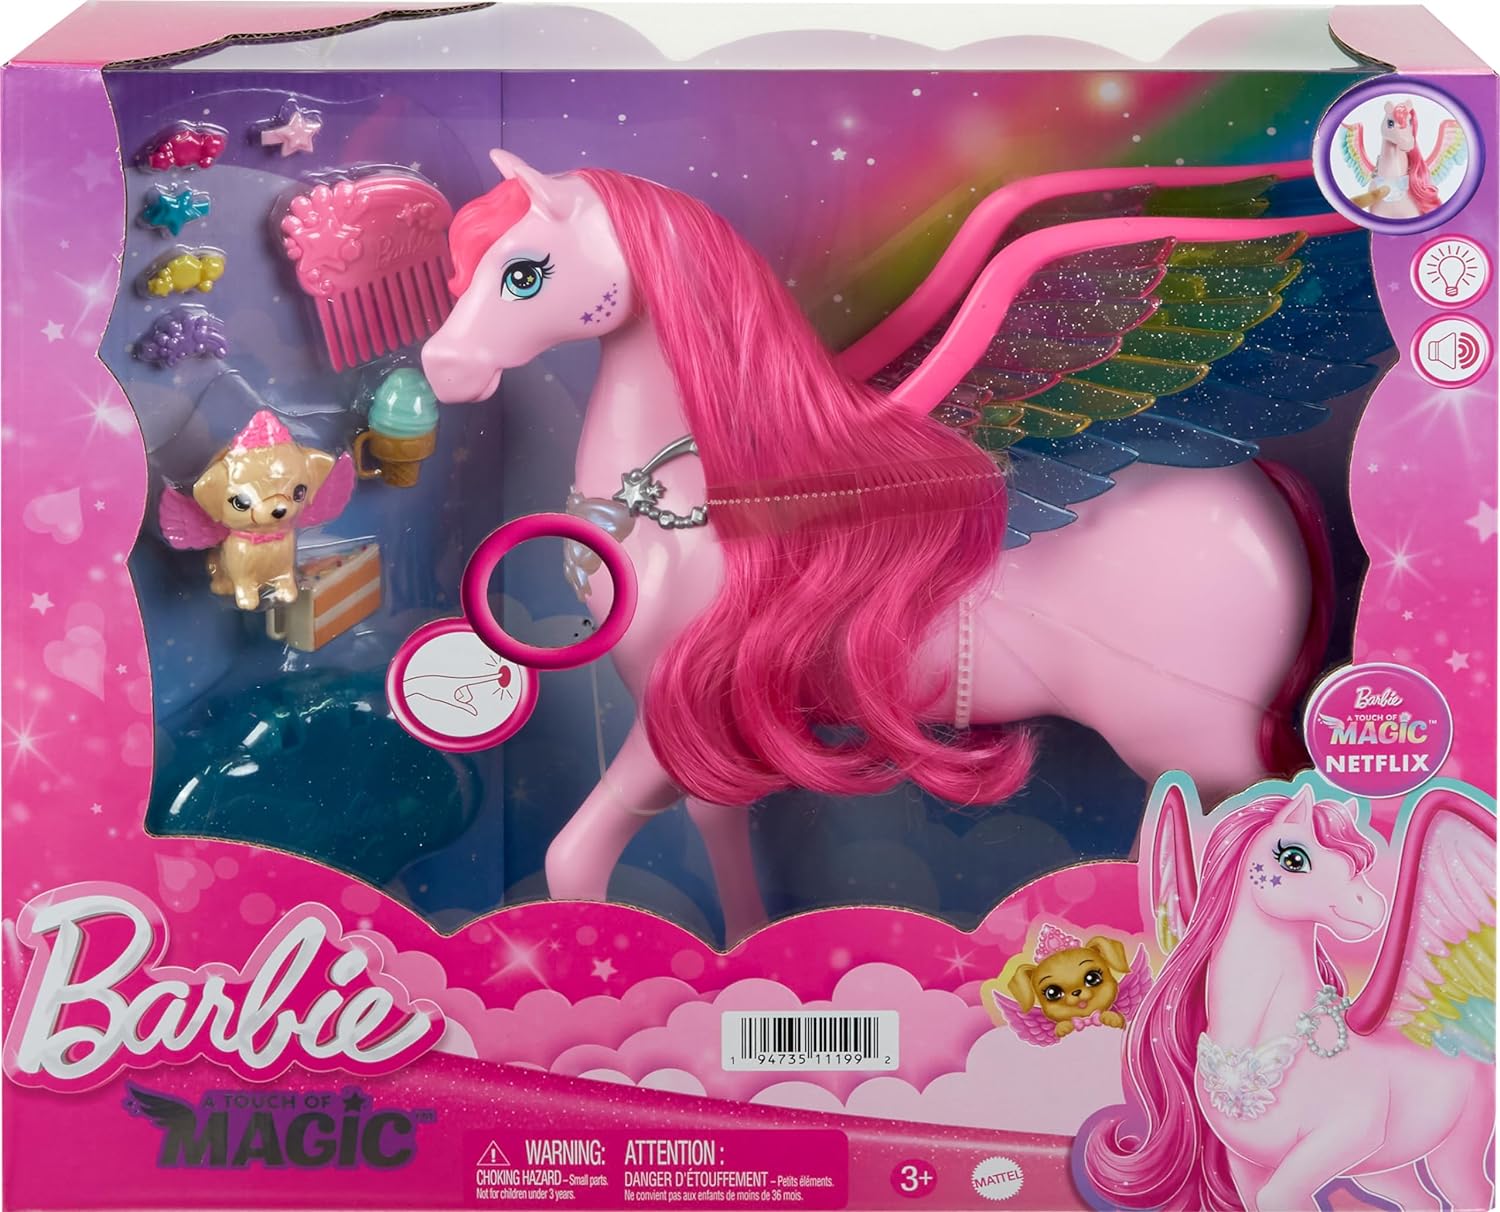 Barbie Pink Barbie Pegasus with 10 Accessories Including Puppy, Winged Horse Toys with Lights and Sounds, Barbie A Touch of Magic (Amazon Exclusive)